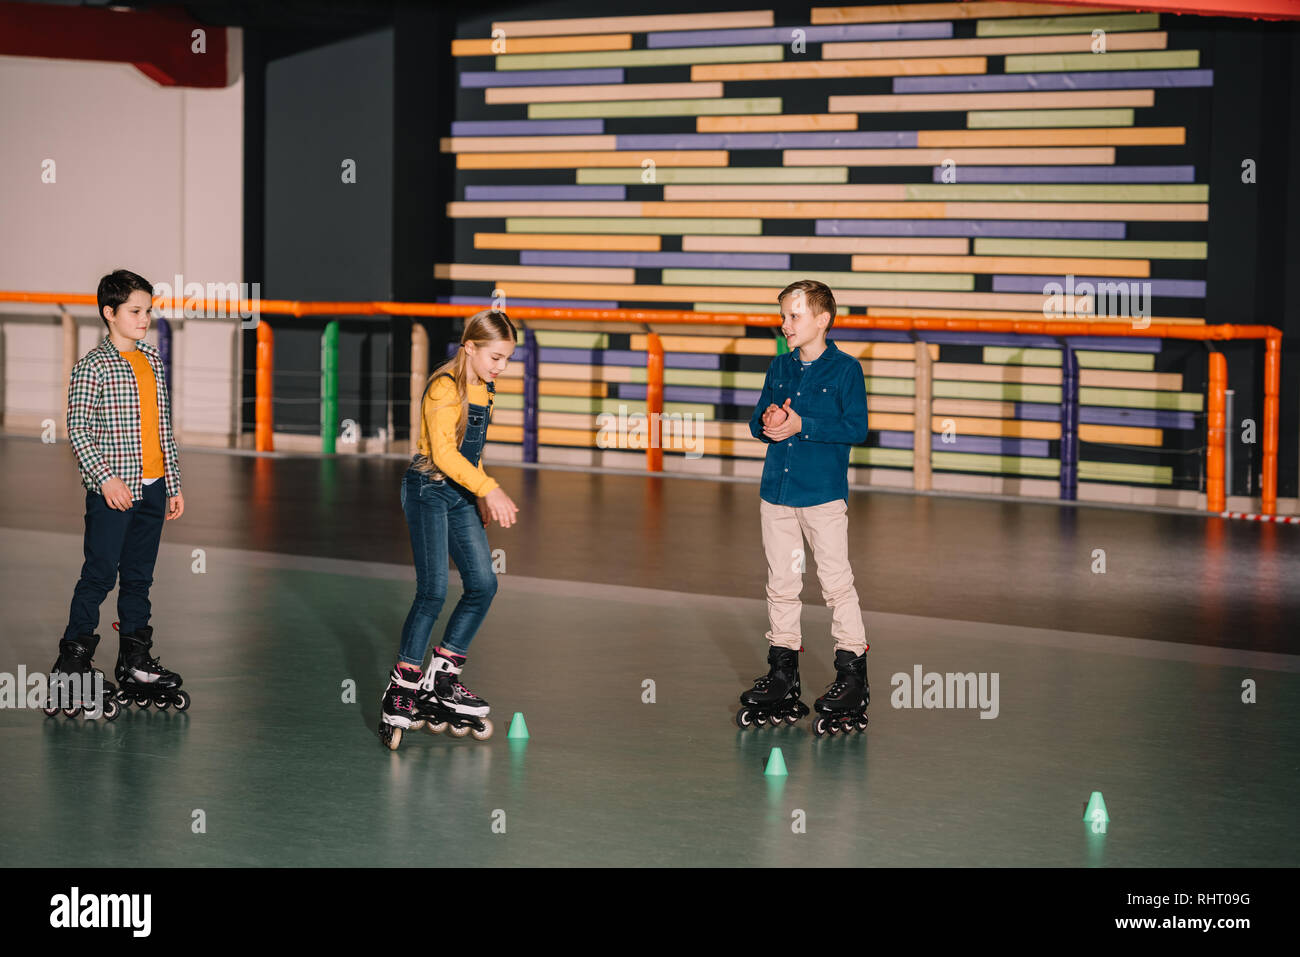 Preteen roller skaters practicing skating on rink together Stock Photo